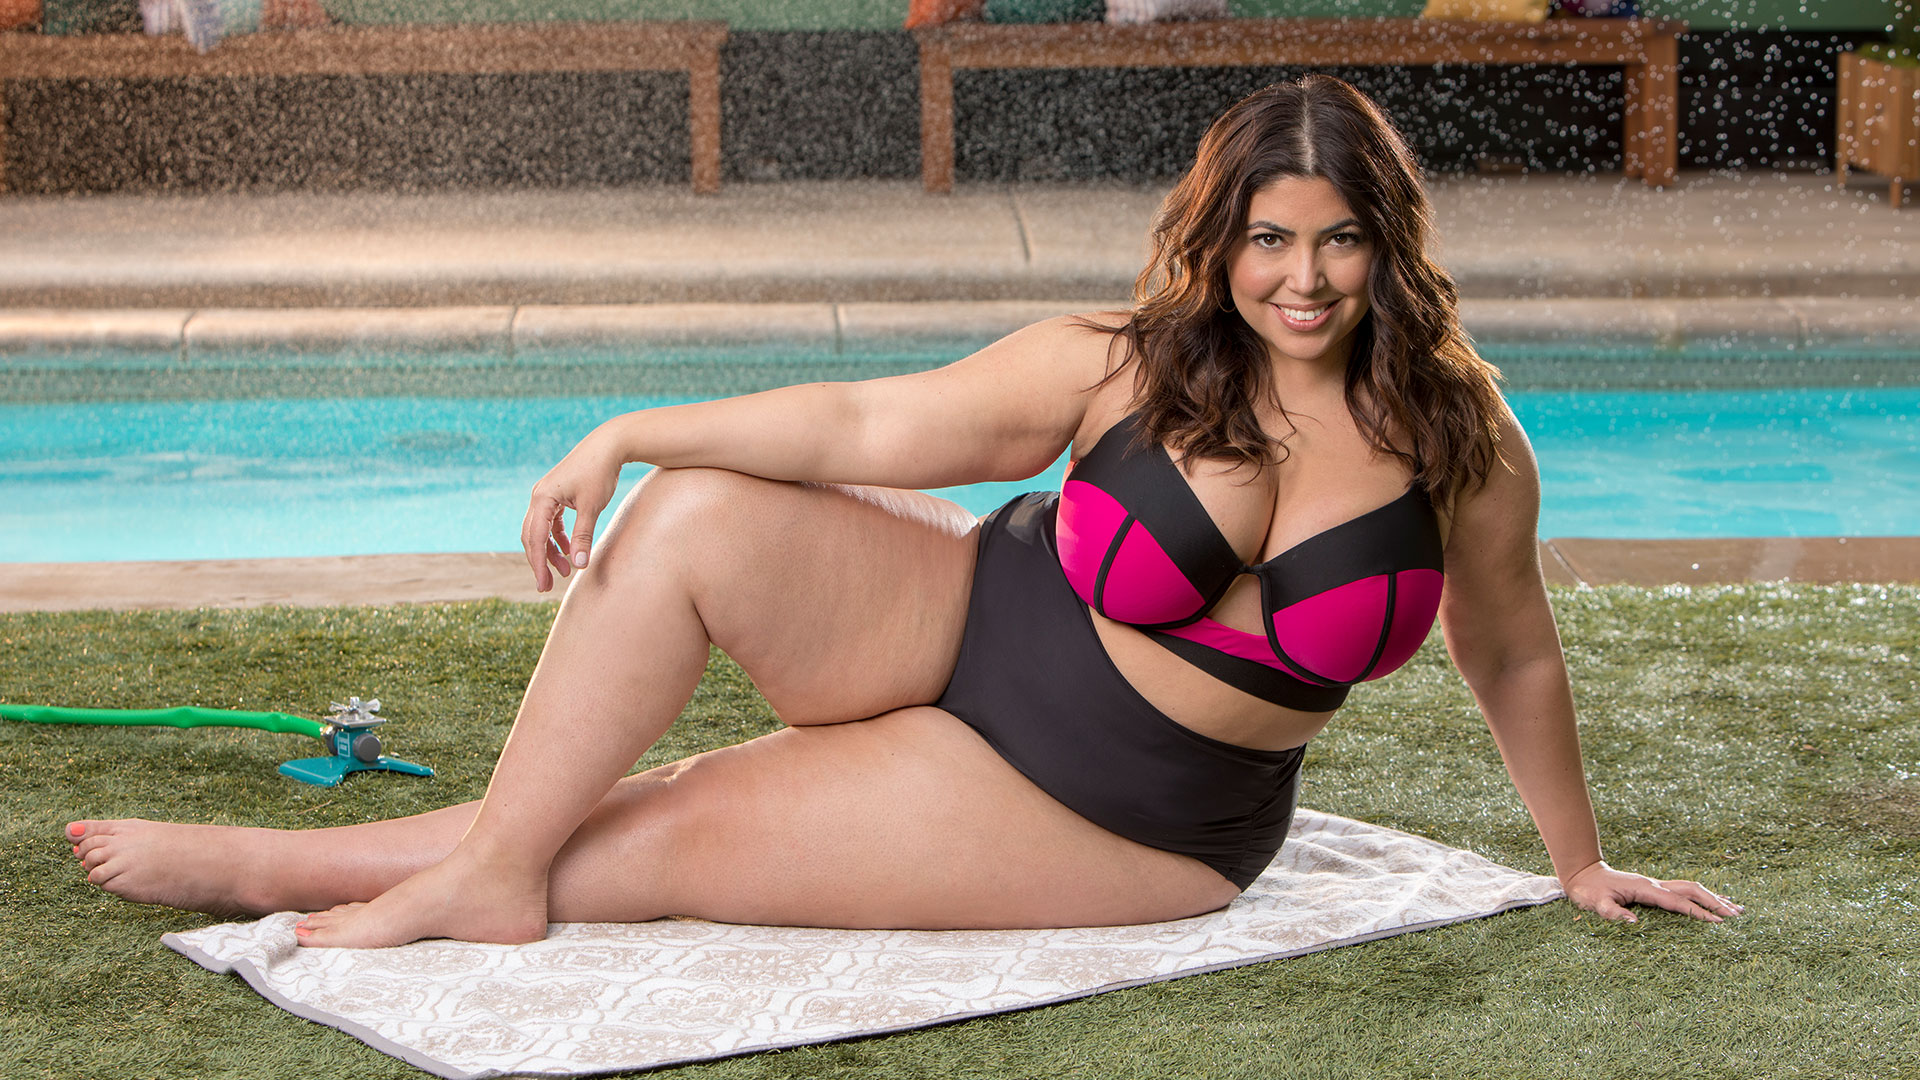 Jessica Milagros puts her modeling experience to good use showing off modern swimwear.